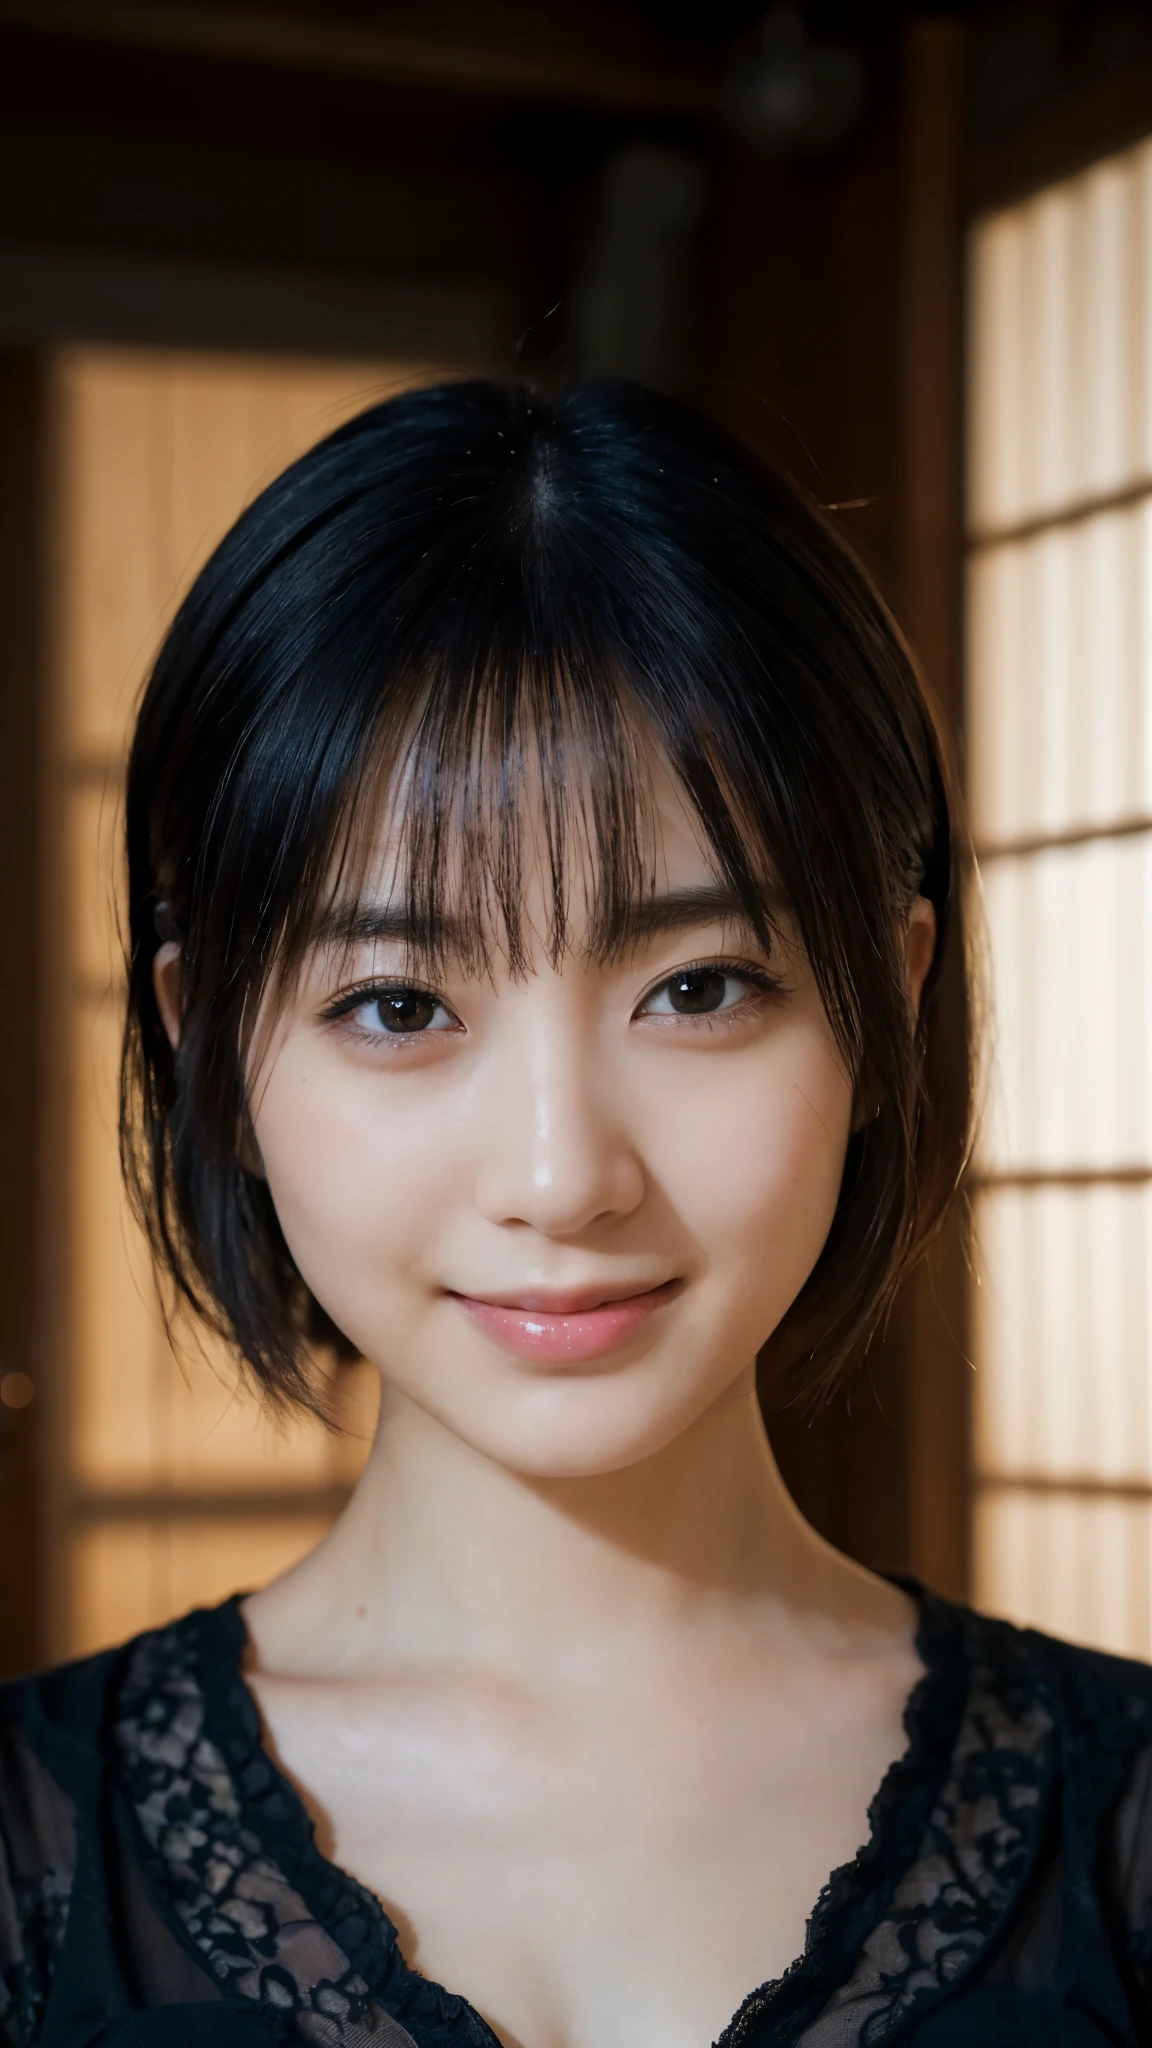 (highest quality,masterpiece:1.3,Ultra-high resolution),(Super detailed,Caustics,8k), (Photorealistic:1.4, RAW shooting),Inside the room,Japanese,20-year-old,smile,Black short hair,Black Shirt,Bust up shot,Face Focus,Face close up,Natural light,Professional Lighting